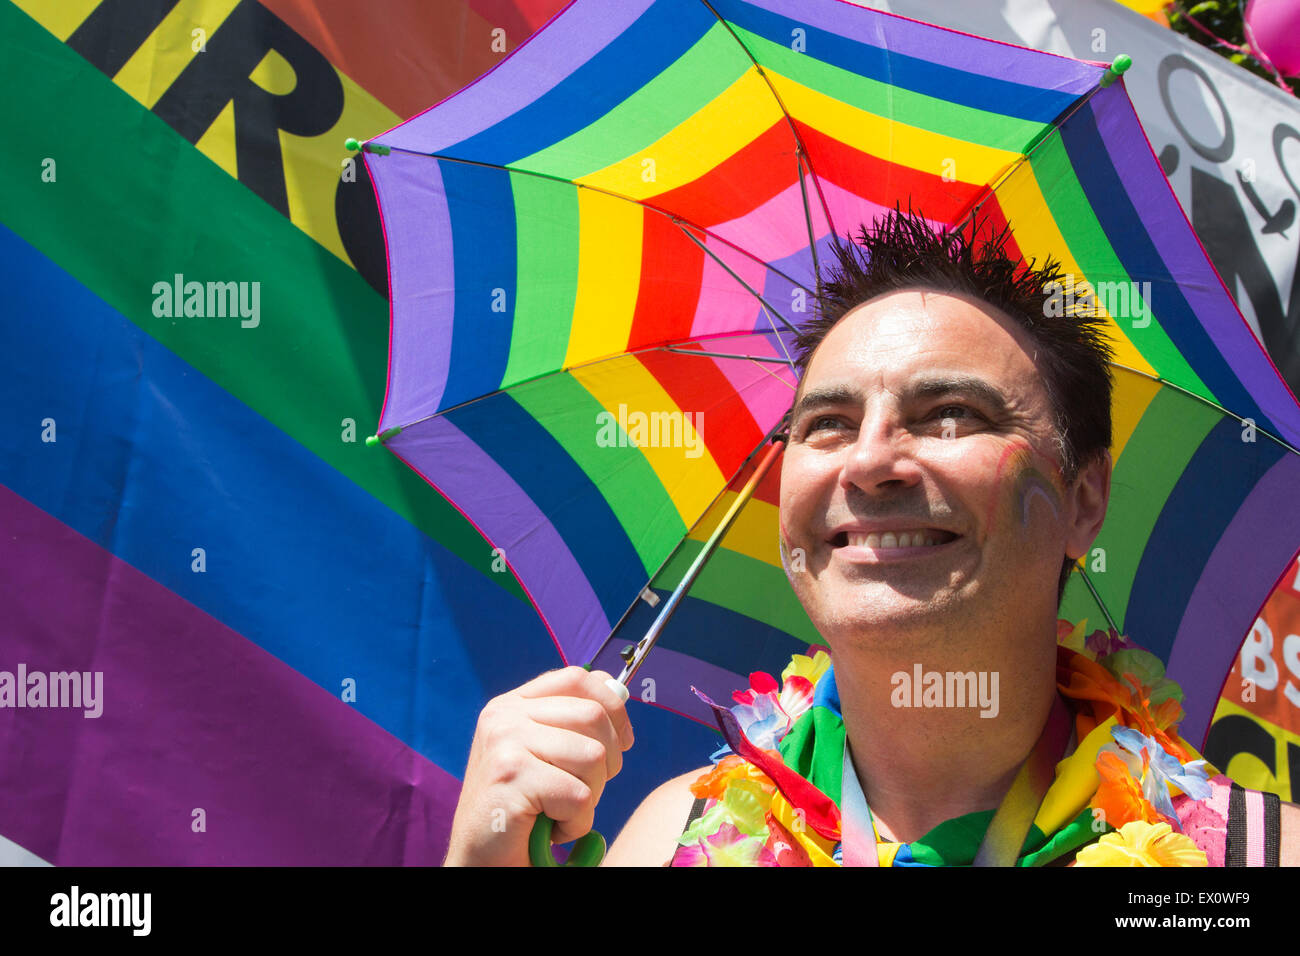 Man holding a rainbow coloured umbrella at the LGBT Pride in London Parade. Stock Photo